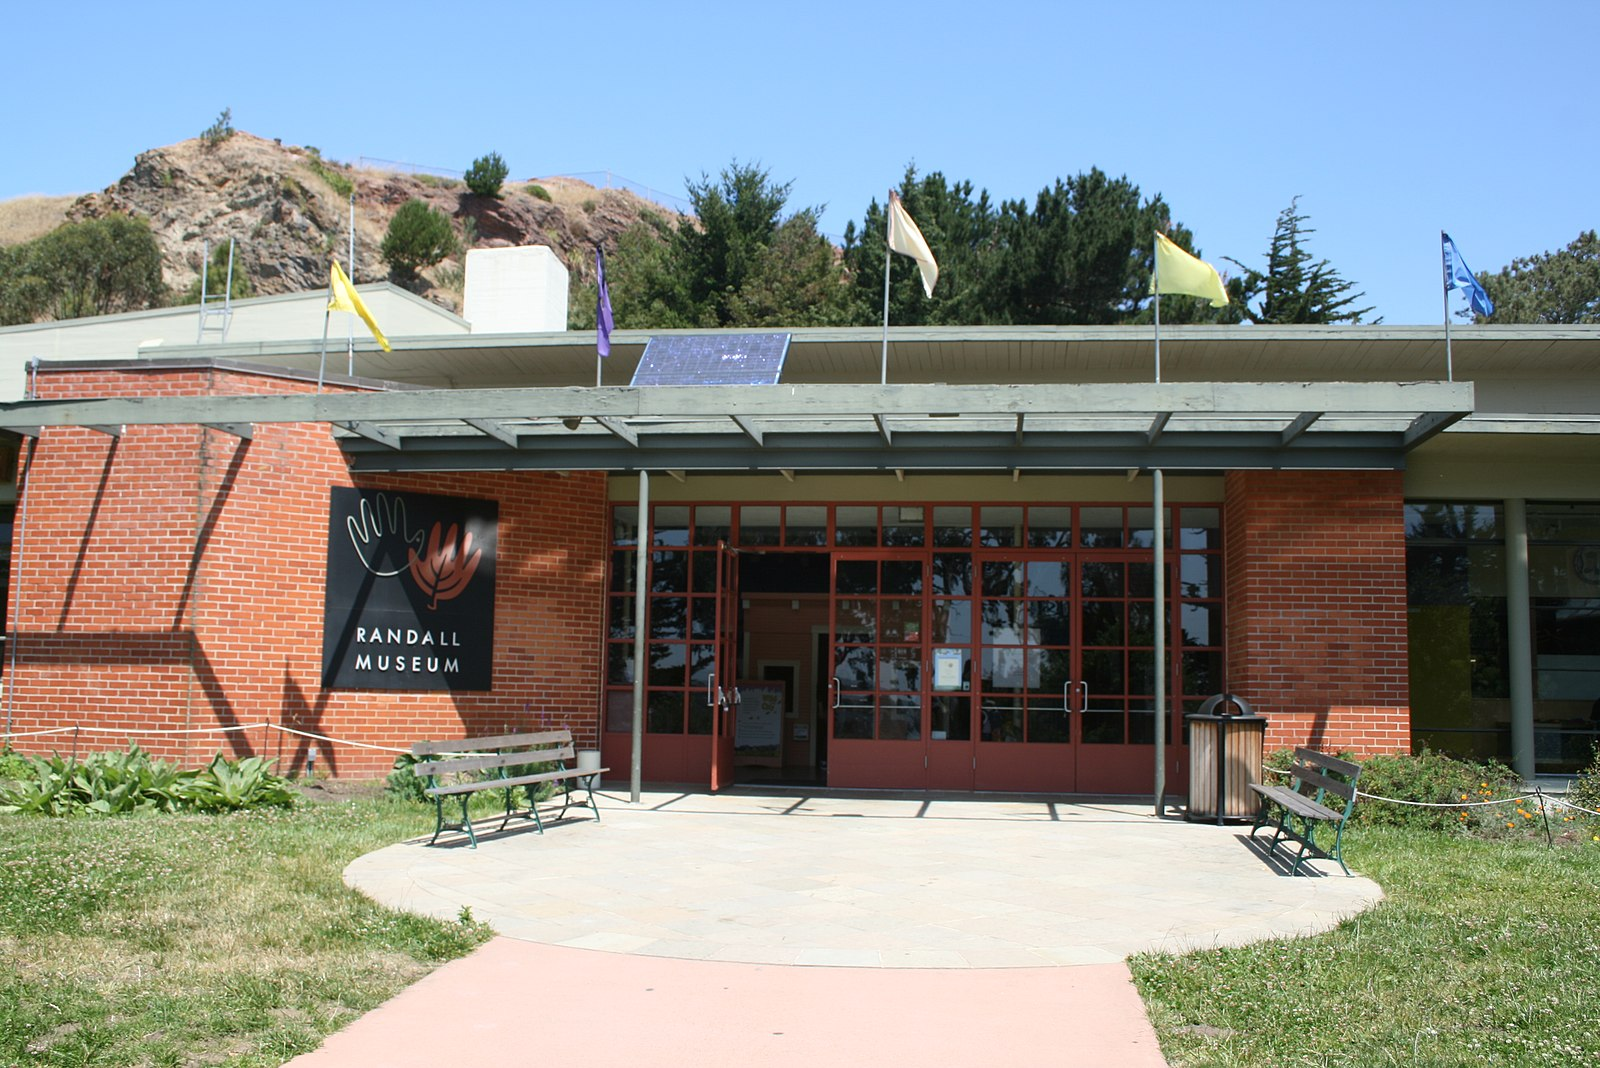 the randall museum